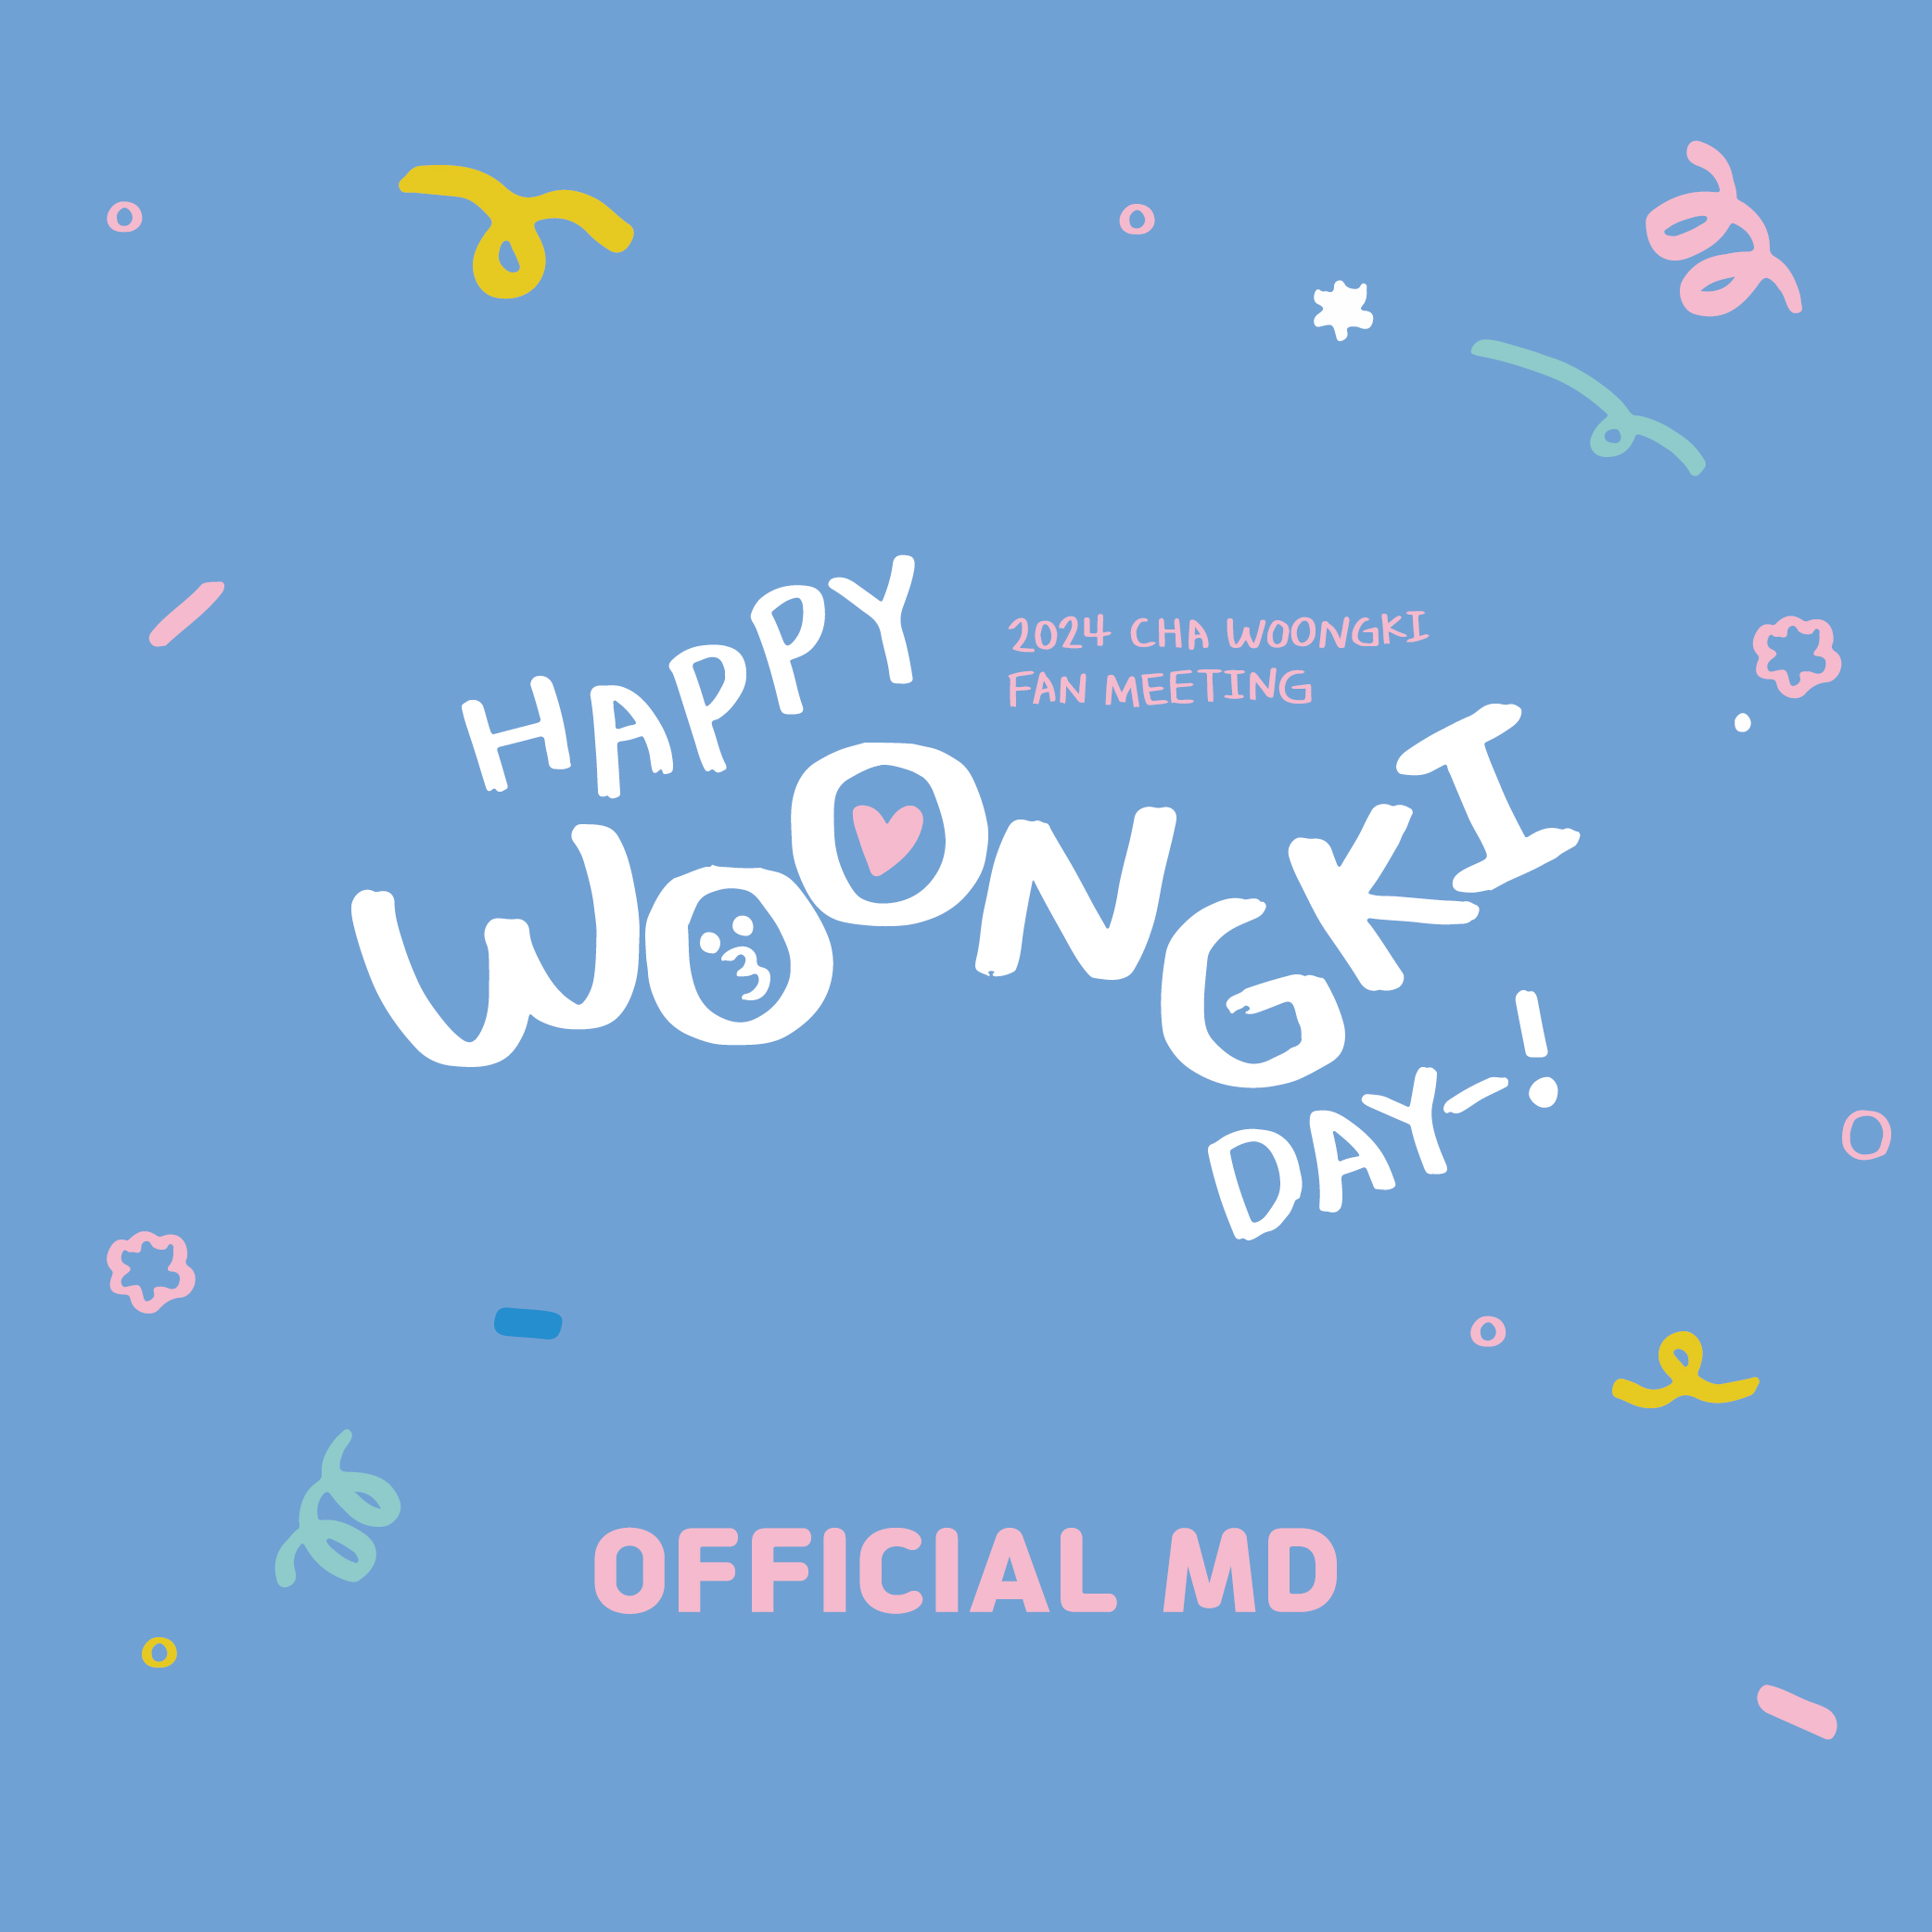 CHA WOONG KI FANMEETING [HAPPY WOONGKI DAY-!] OFFICIAL MD